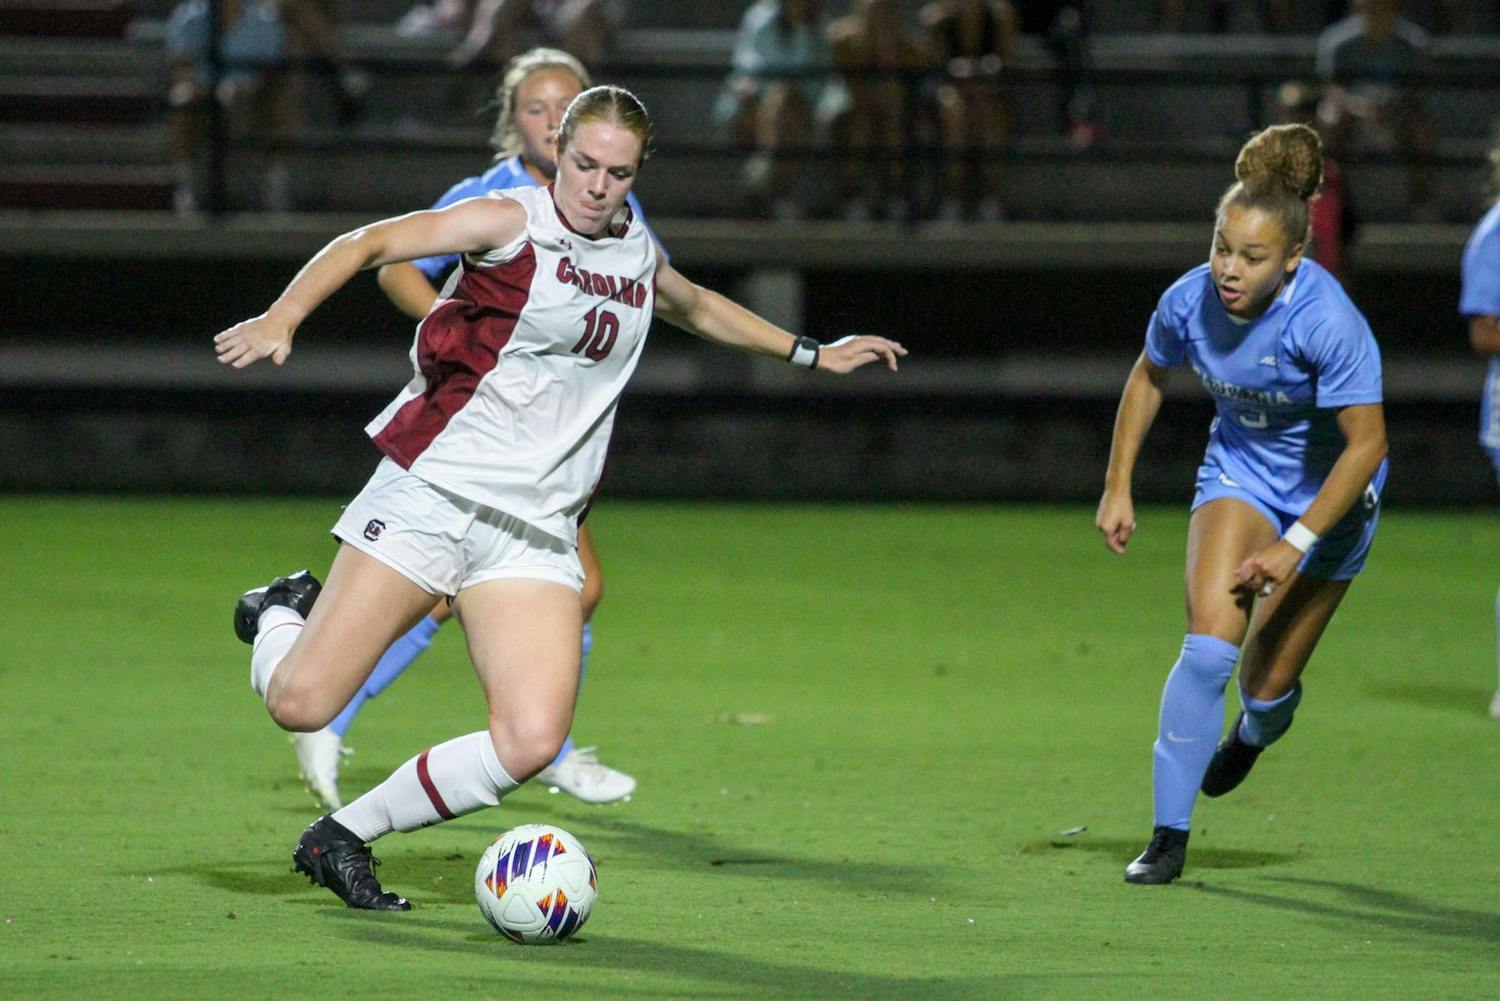 Senior forward Catherine Barry sends the ball of the field during South Carolina’s match against UNC at Stone Stadium on Sept. 7, 2023. The Gamecocks lost to the Tar Heels 2-1.